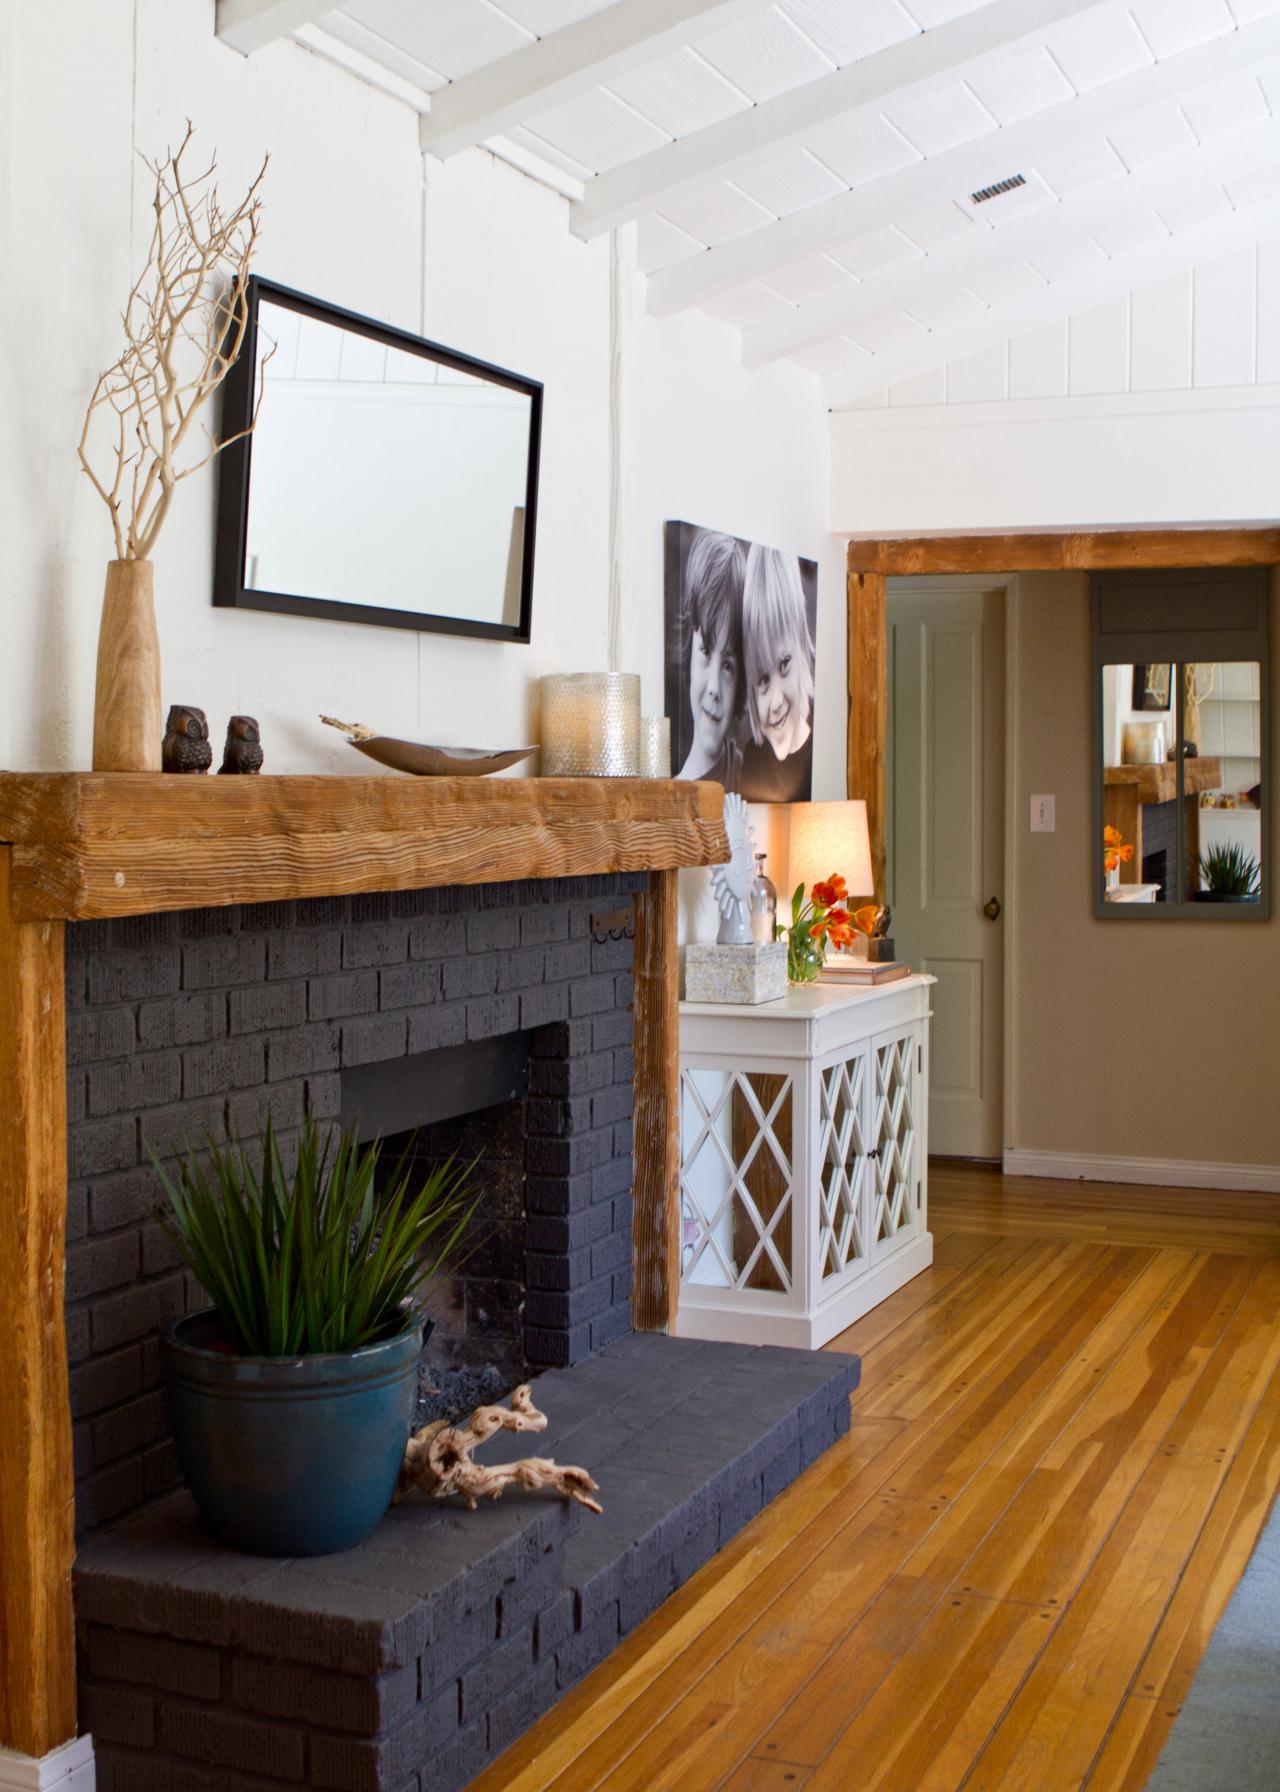 HGTV.com shares 15 beautiful painted brick fireplaces for every design style.